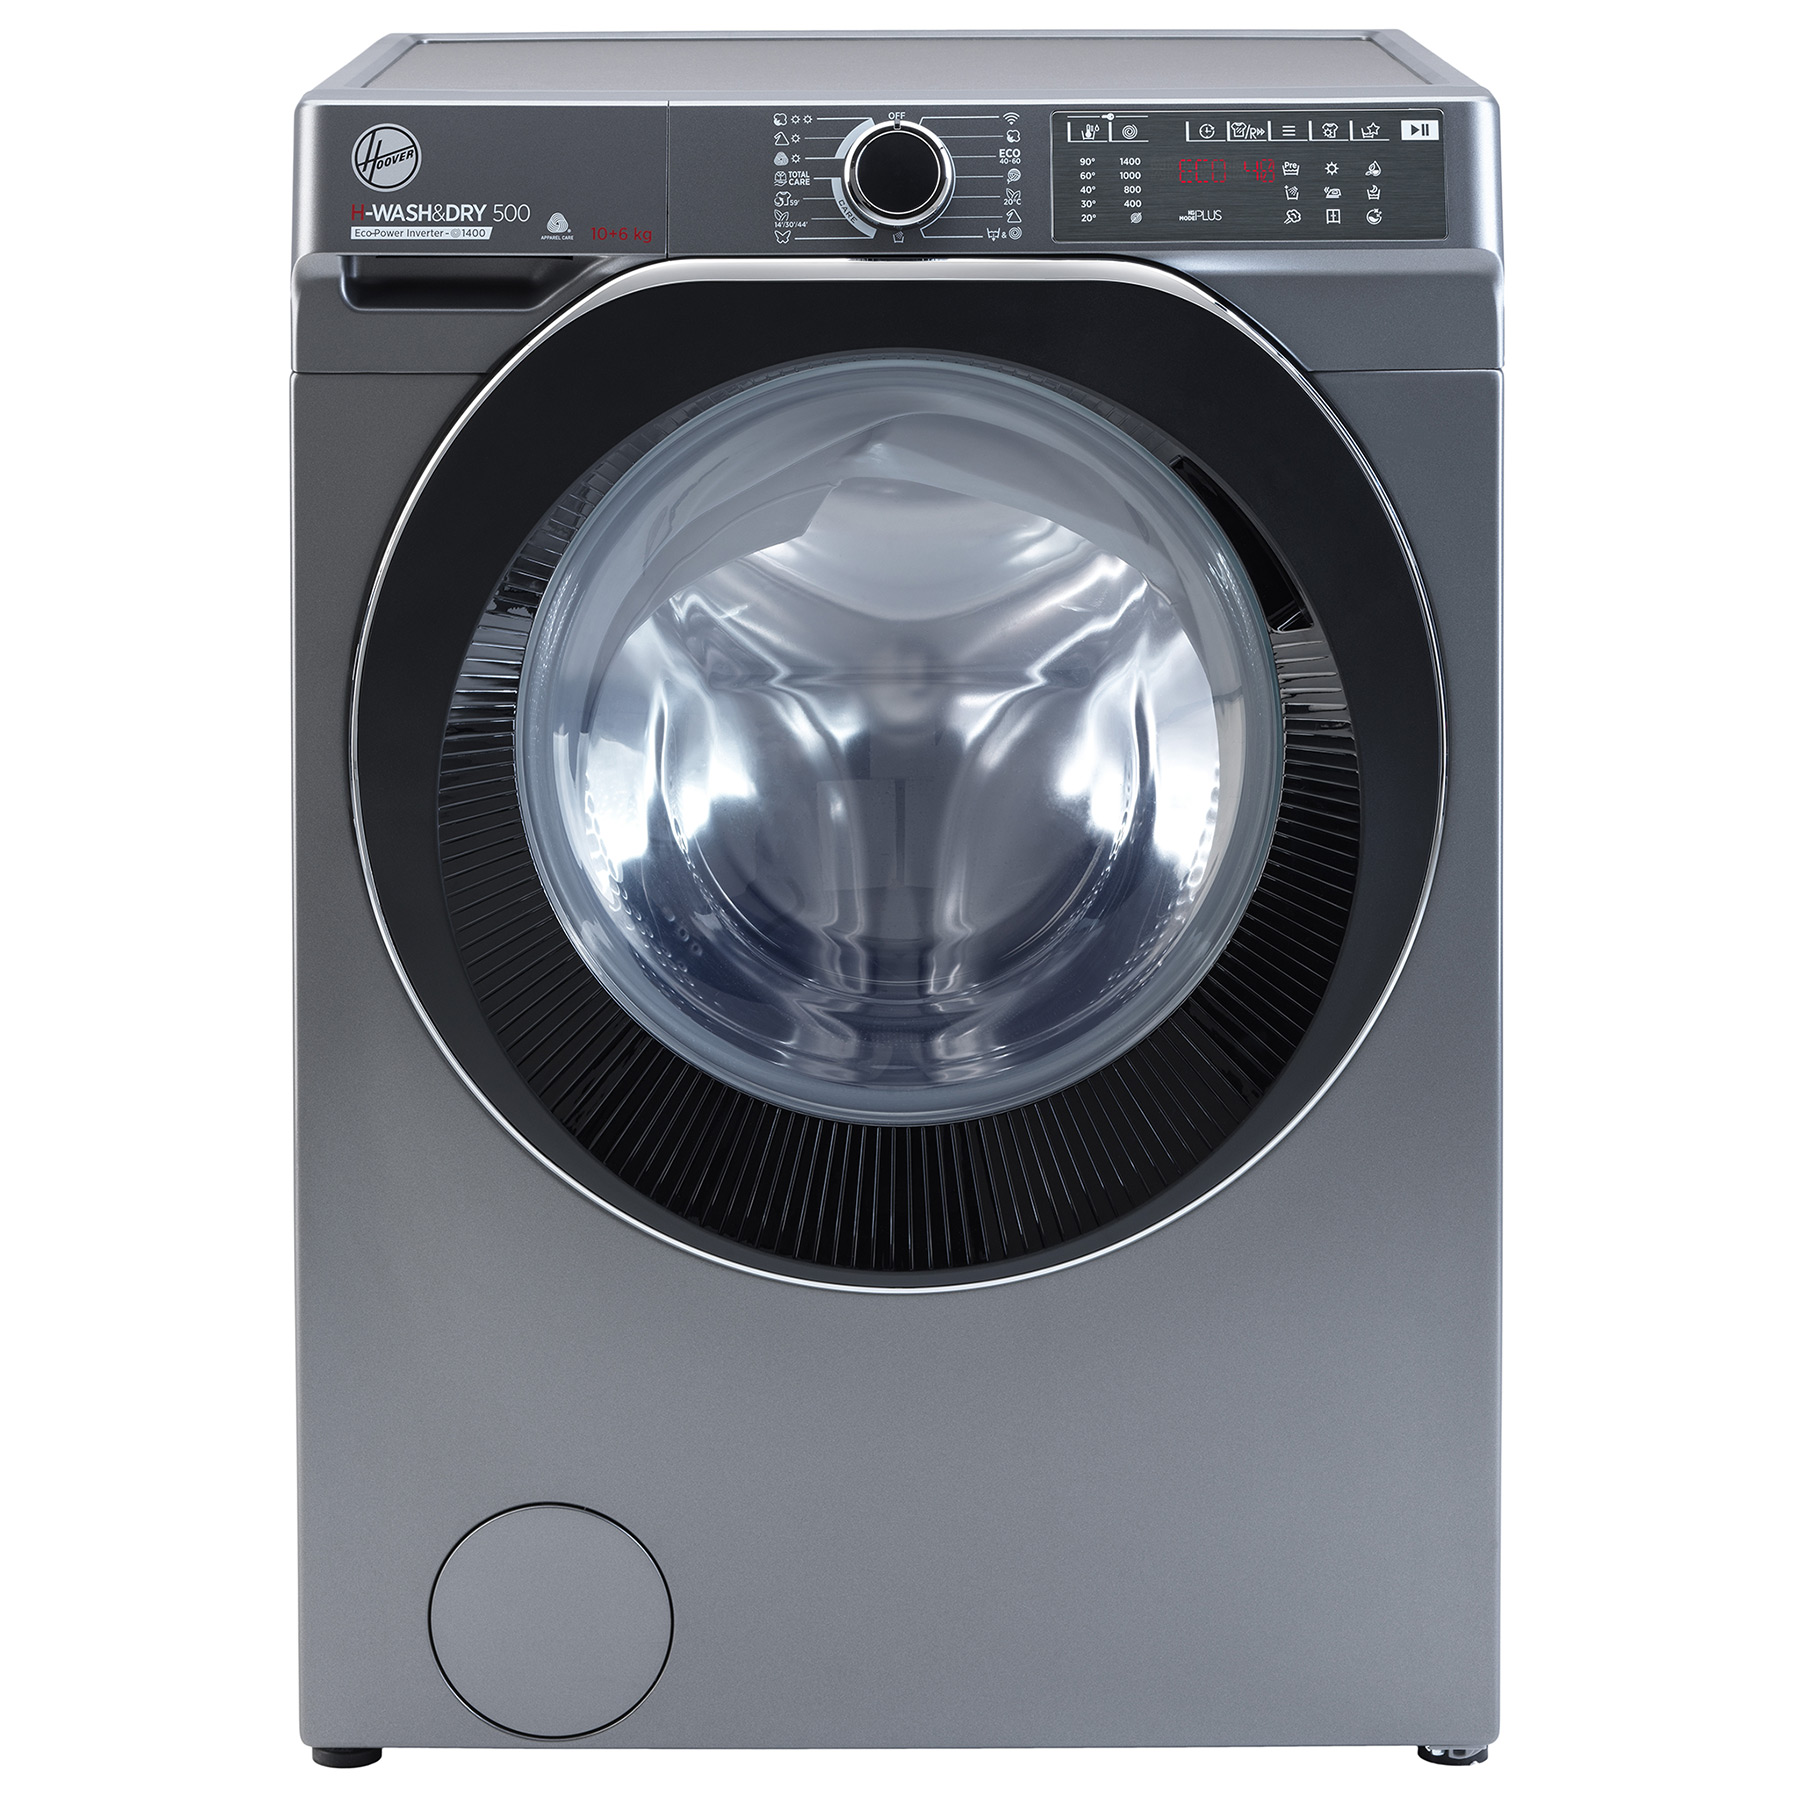 Image of Hoover HDB4106AMBCR Washer Dryer in Graphite 1400rpm 10kg 6Kg D Rated